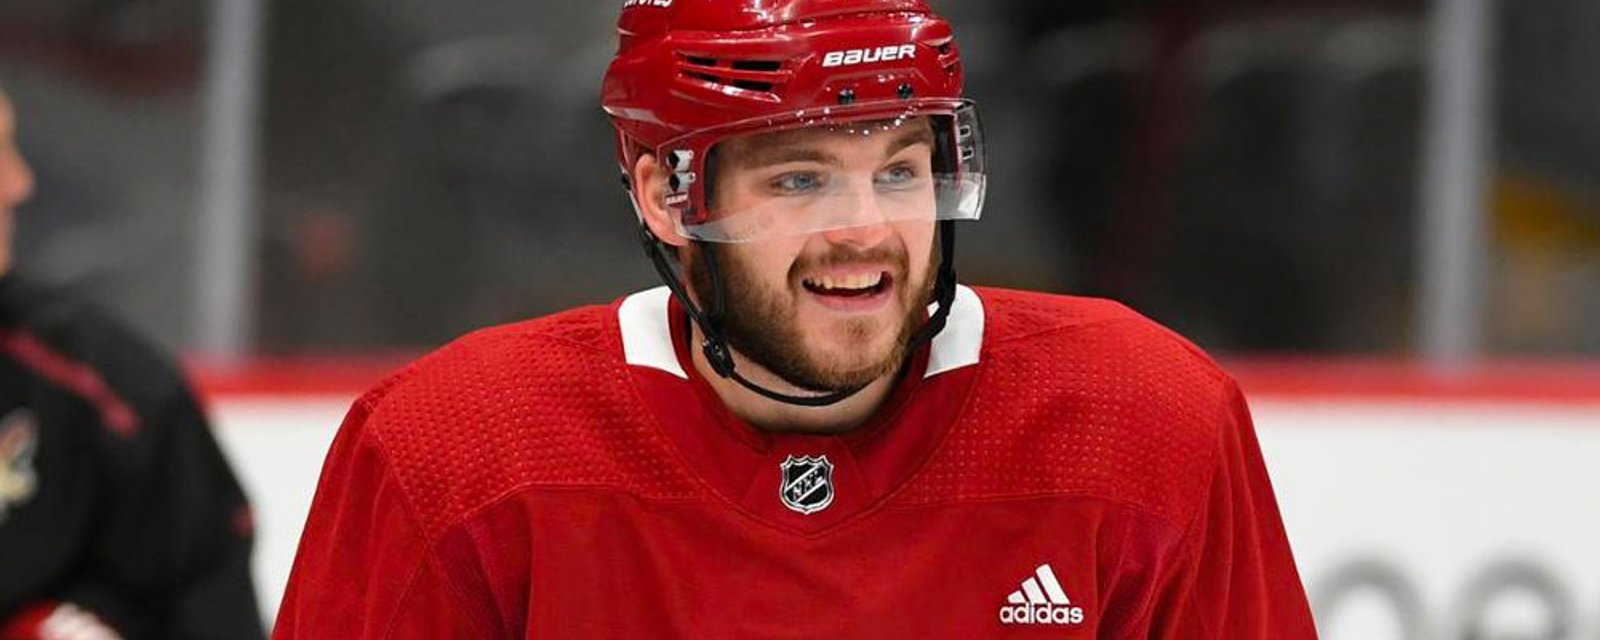 Galchenyuk's contract terminated after an “off-ice situation”